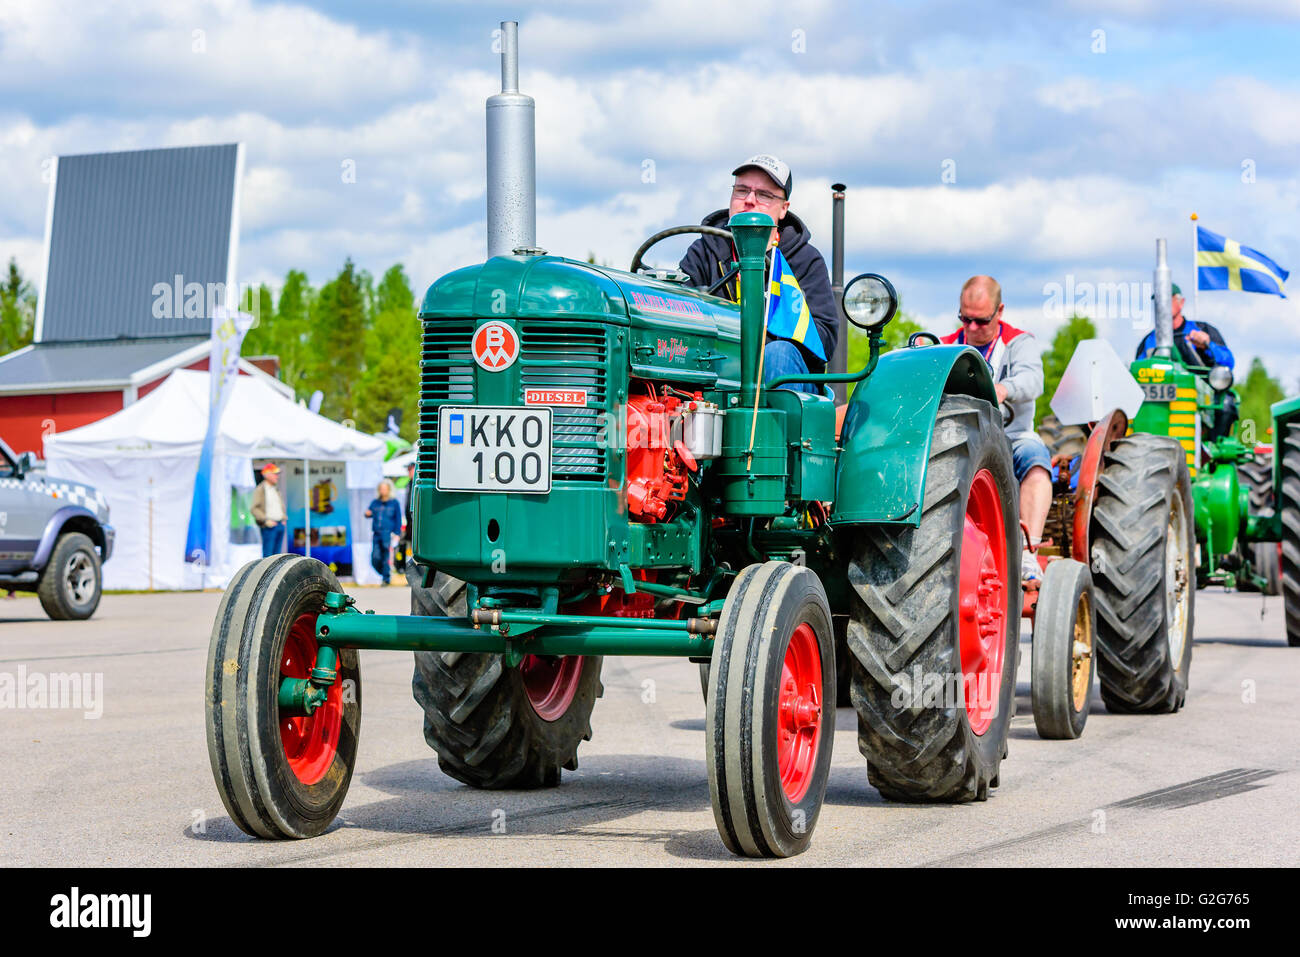 Emmaboda, Sweden - May 14, 2016: Forest and tractor (Skog och traktor) fair. Vintage classic tractors on parade. Here a green an Stock Photo